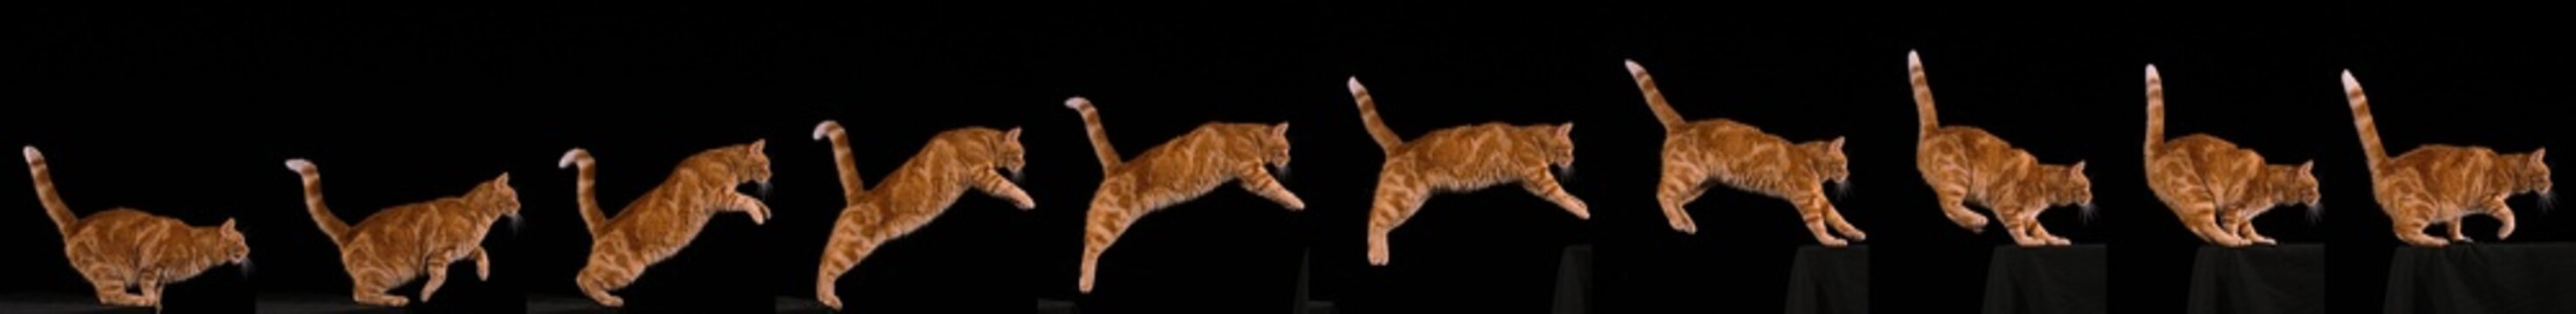 Red Tabby Domestic Cat, Adult Leaping against Black Background